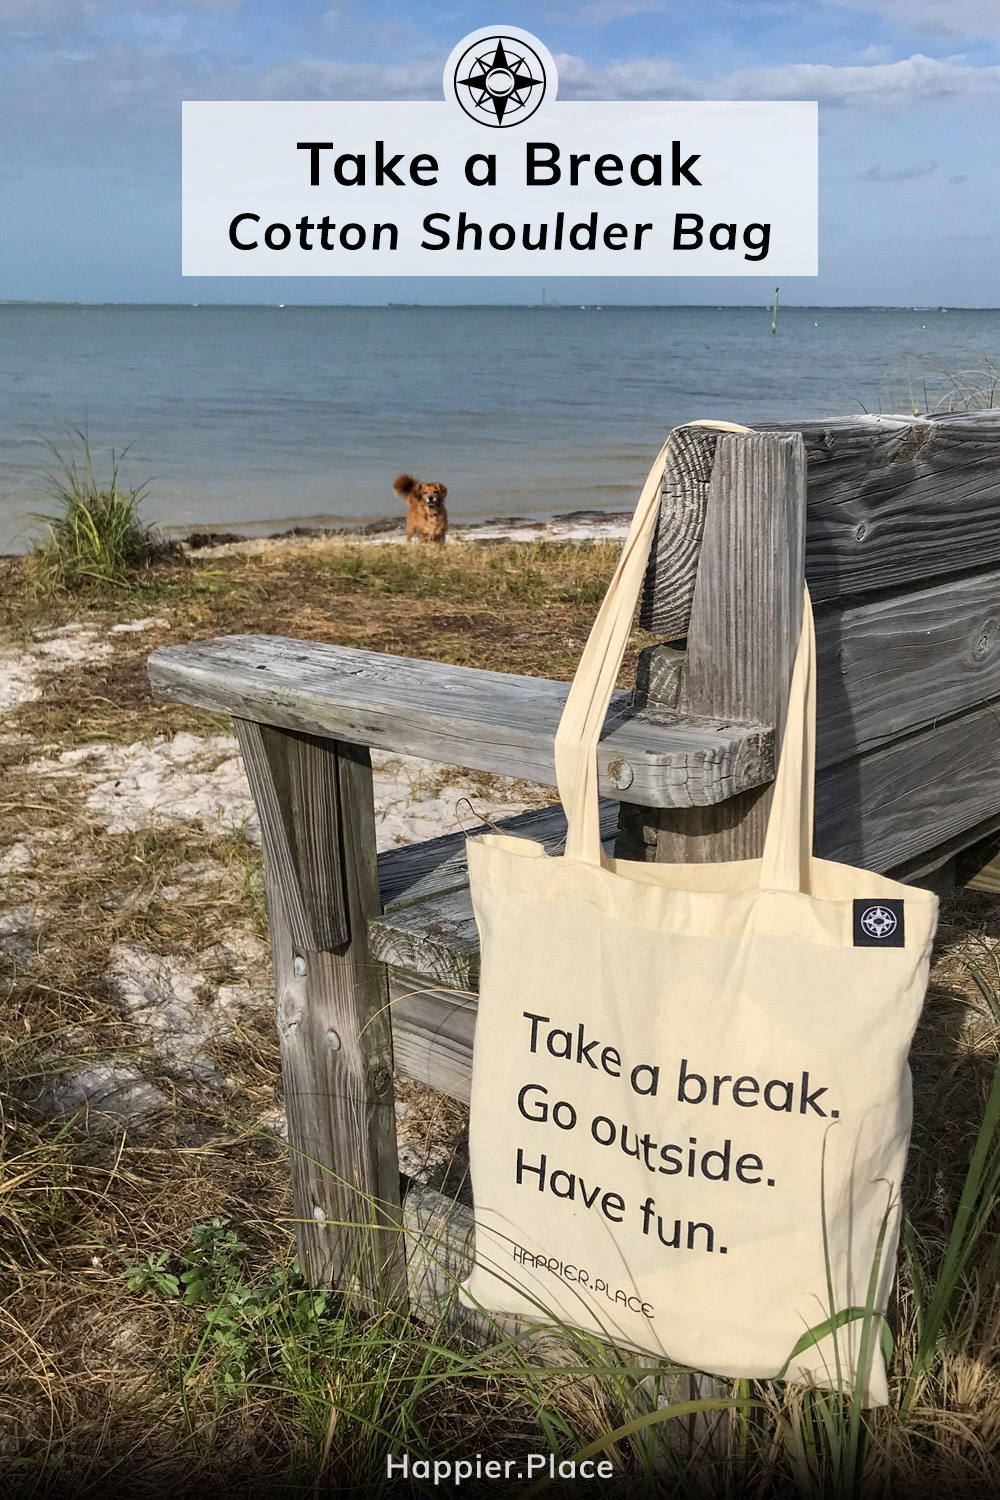 The "Take a break. Go outside. Have fun" Happier Place cotton shoulder bag hanging on a beach bench in Florida. Added fun: Whiskey Dog!